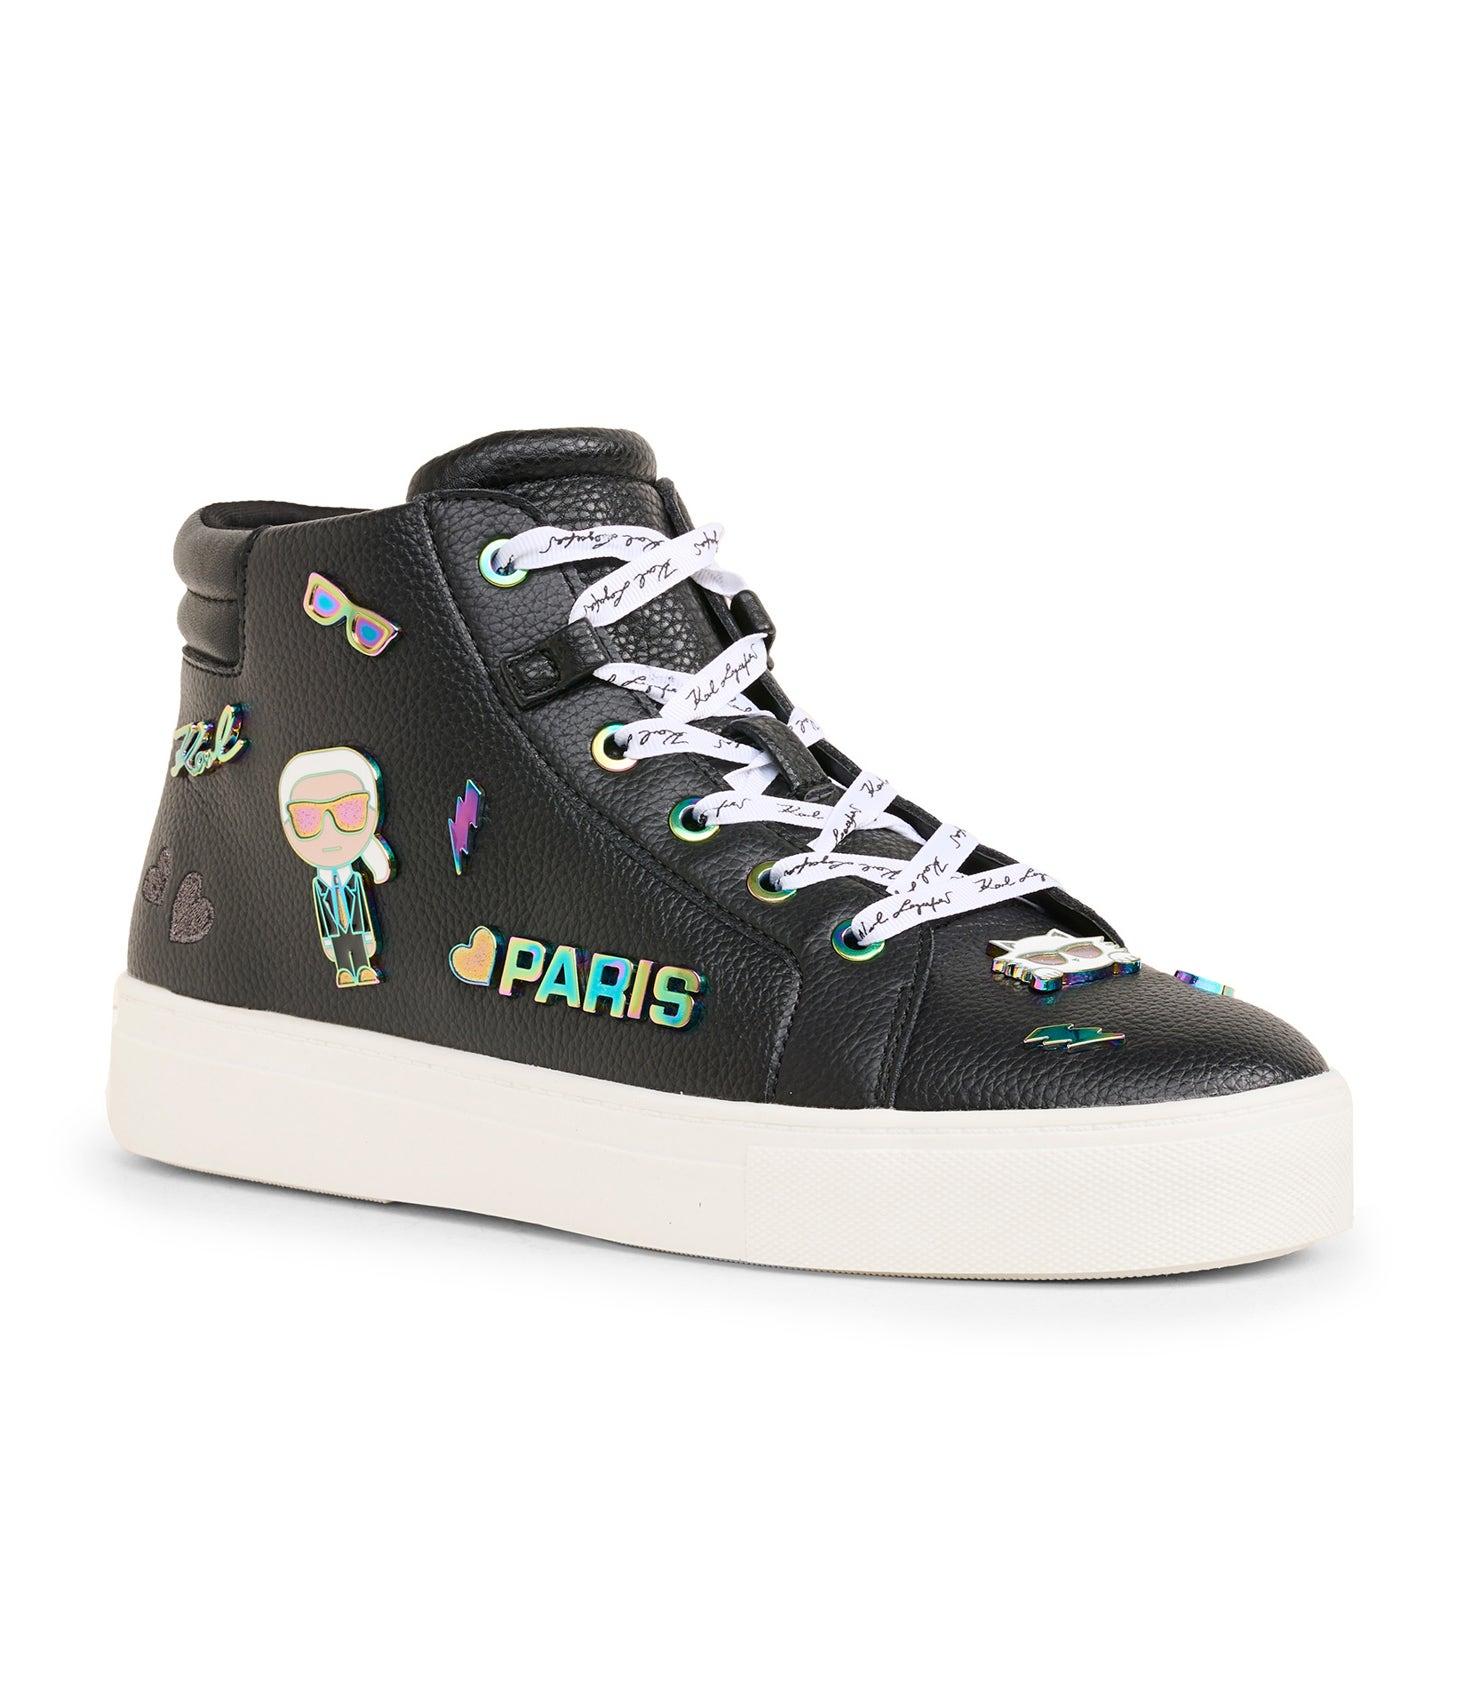 Karl Lagerfeld | Women's Catty Cate Pins High Top Sneakers | Black | Size 6  | Lyst